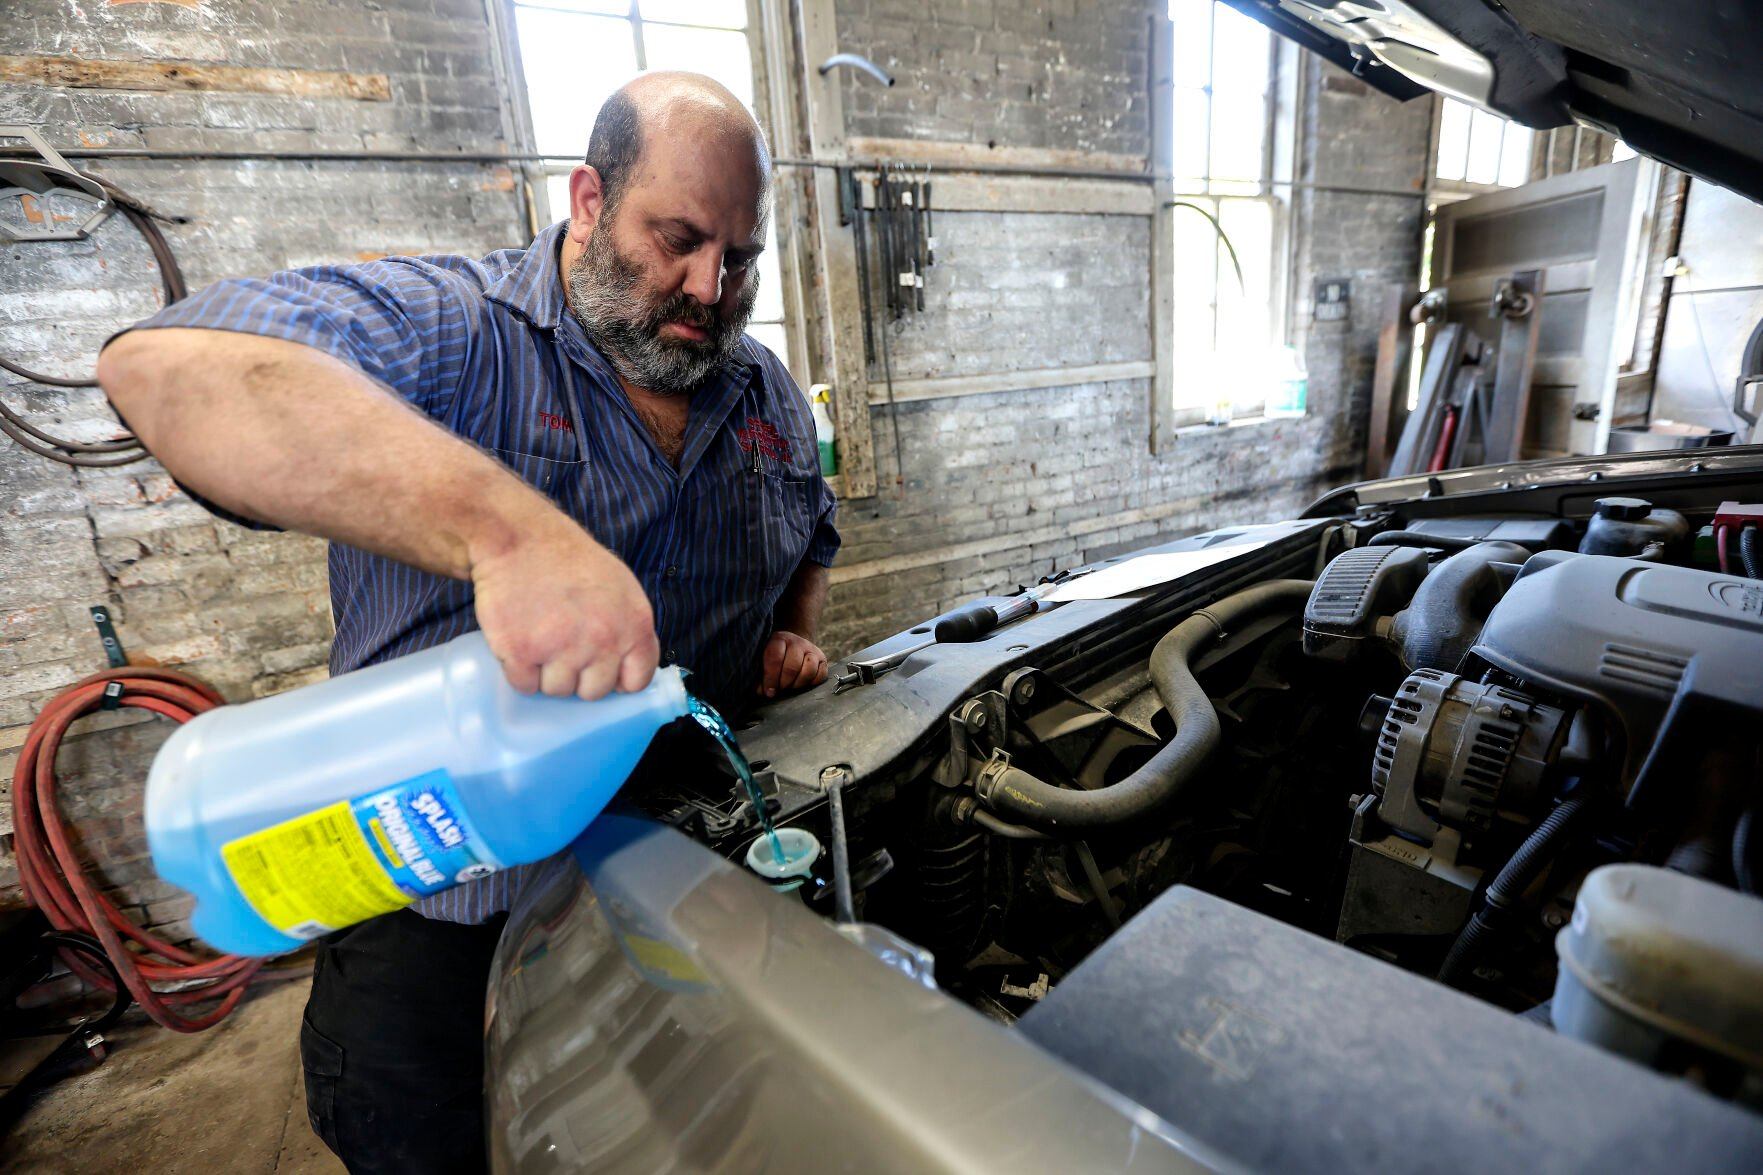 Tom Spoerl works on a truck at Spoerl Automotive in Sherrill, Iowa. The business has been operating at the same location since 1917.    PHOTO CREDIT: Dave Kettering
Telegraph Herald